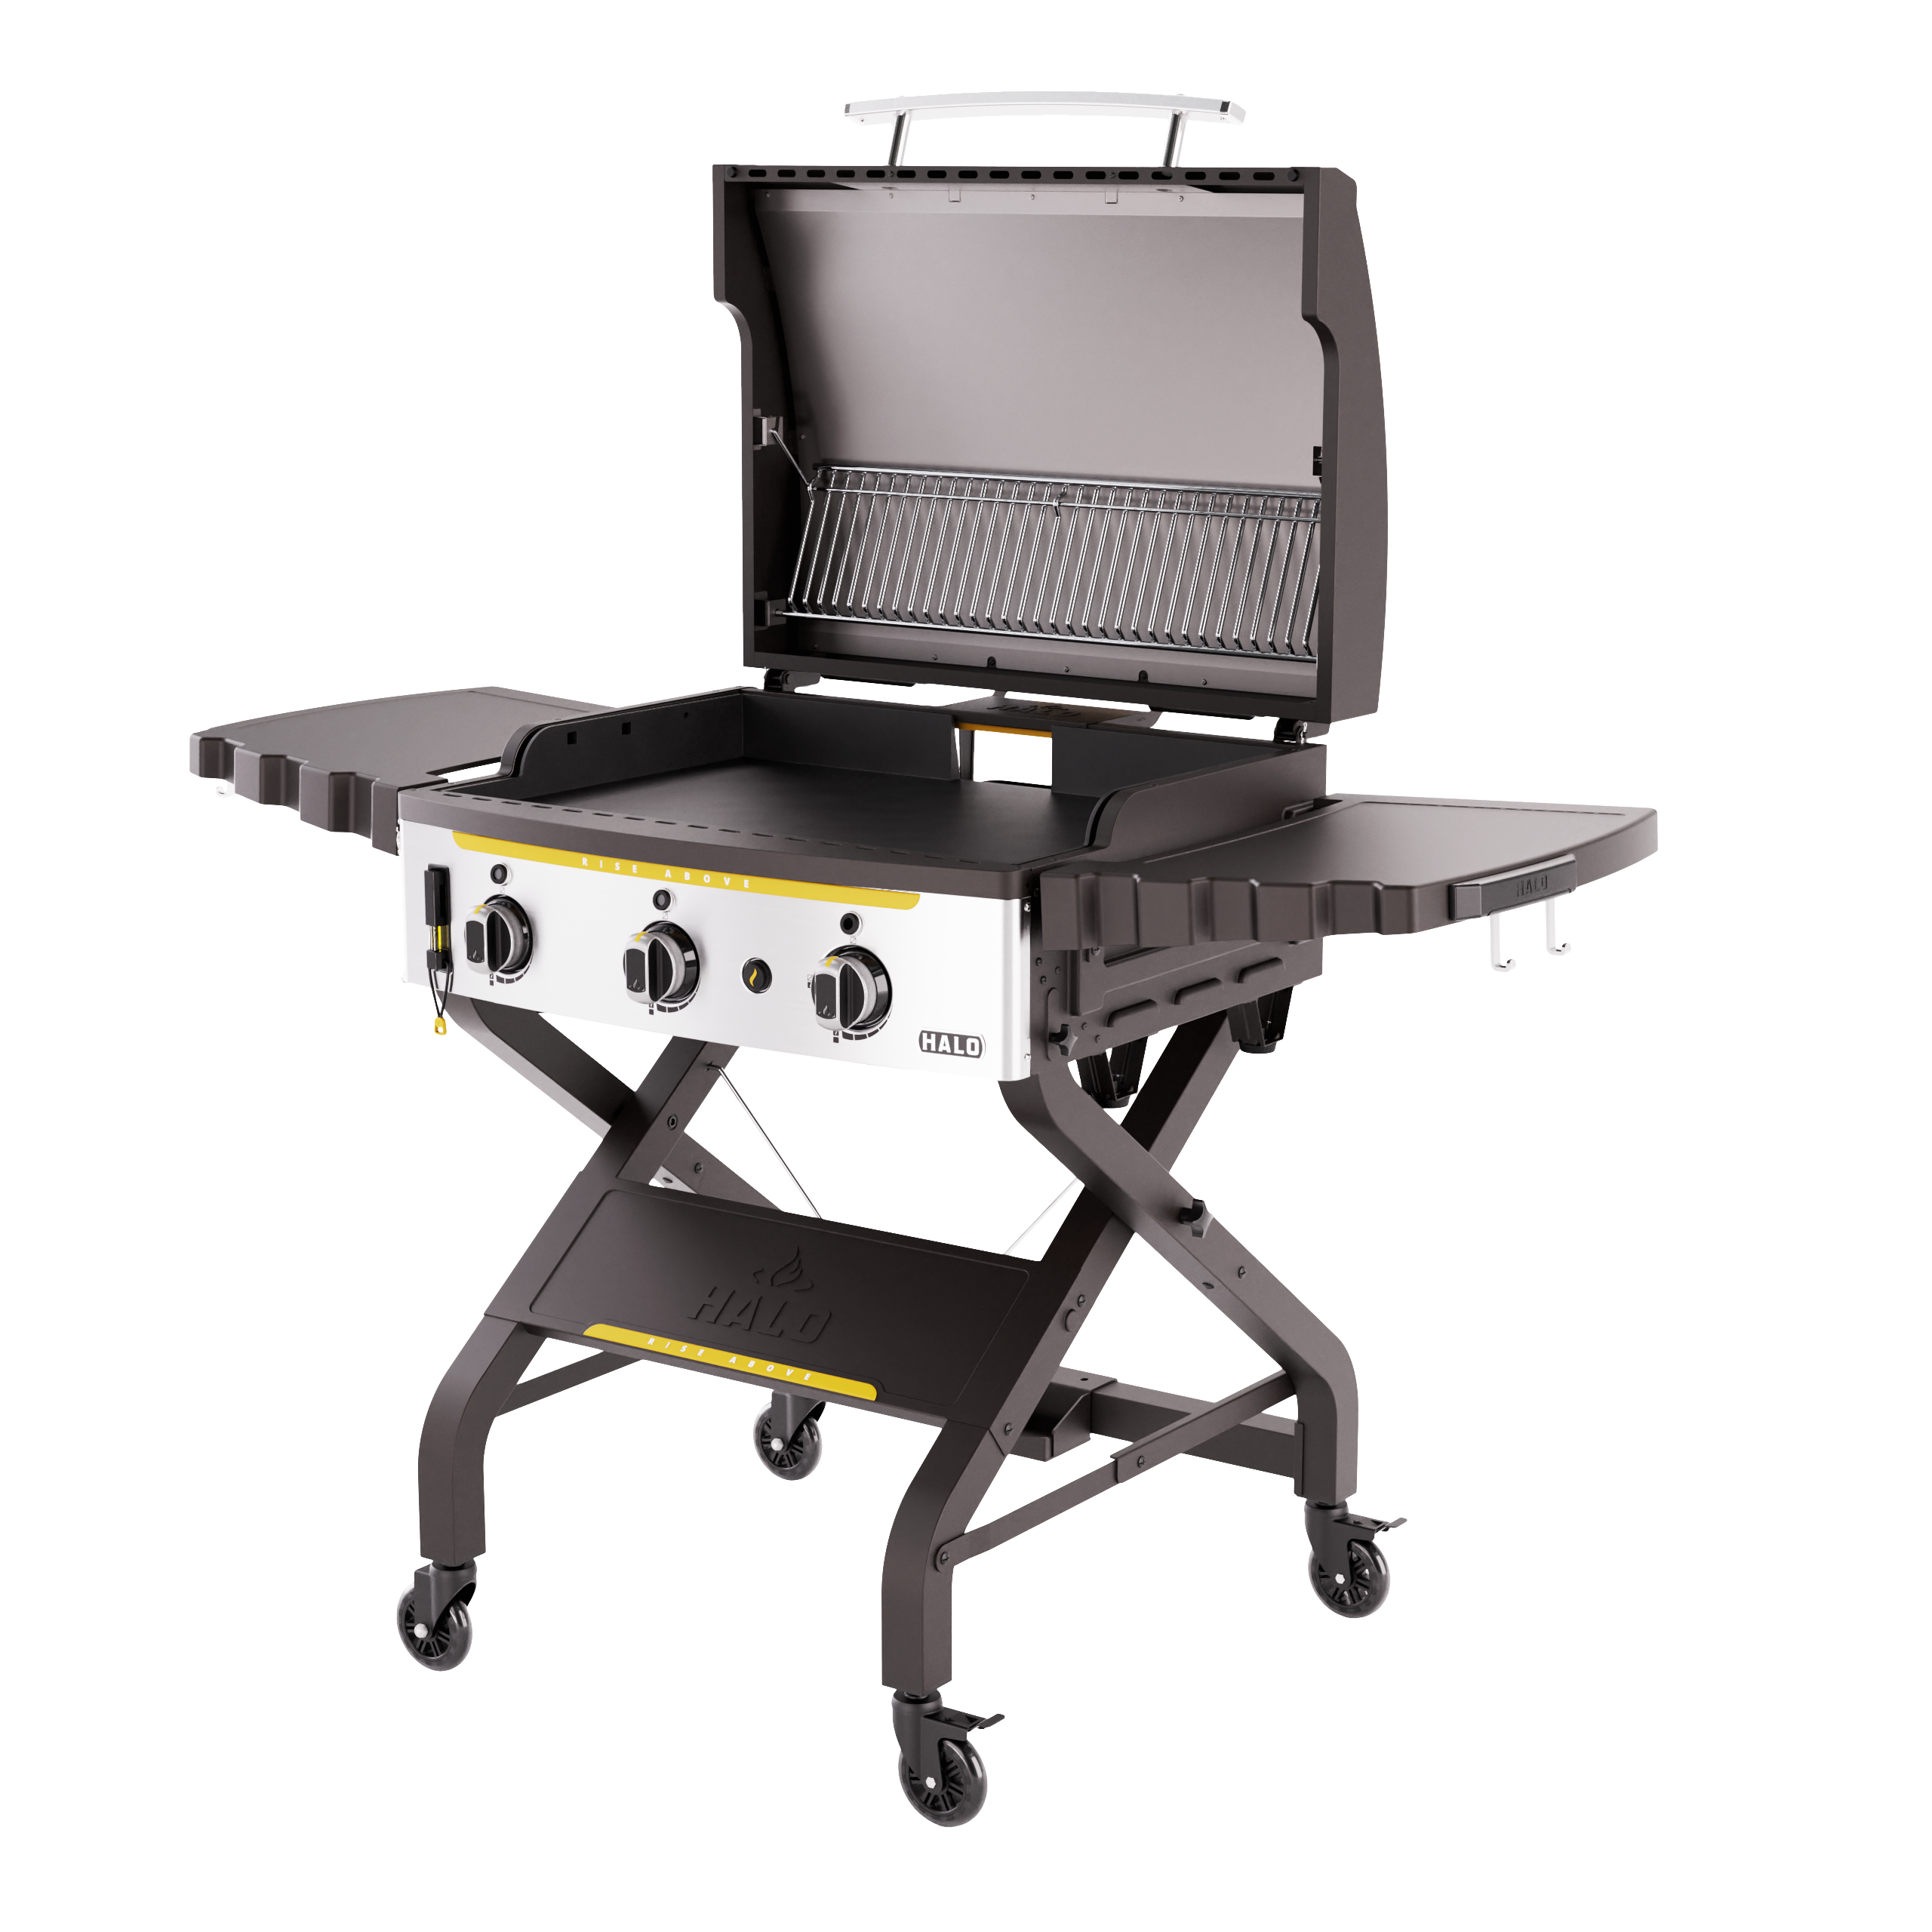 Halo Outdoor Griddle